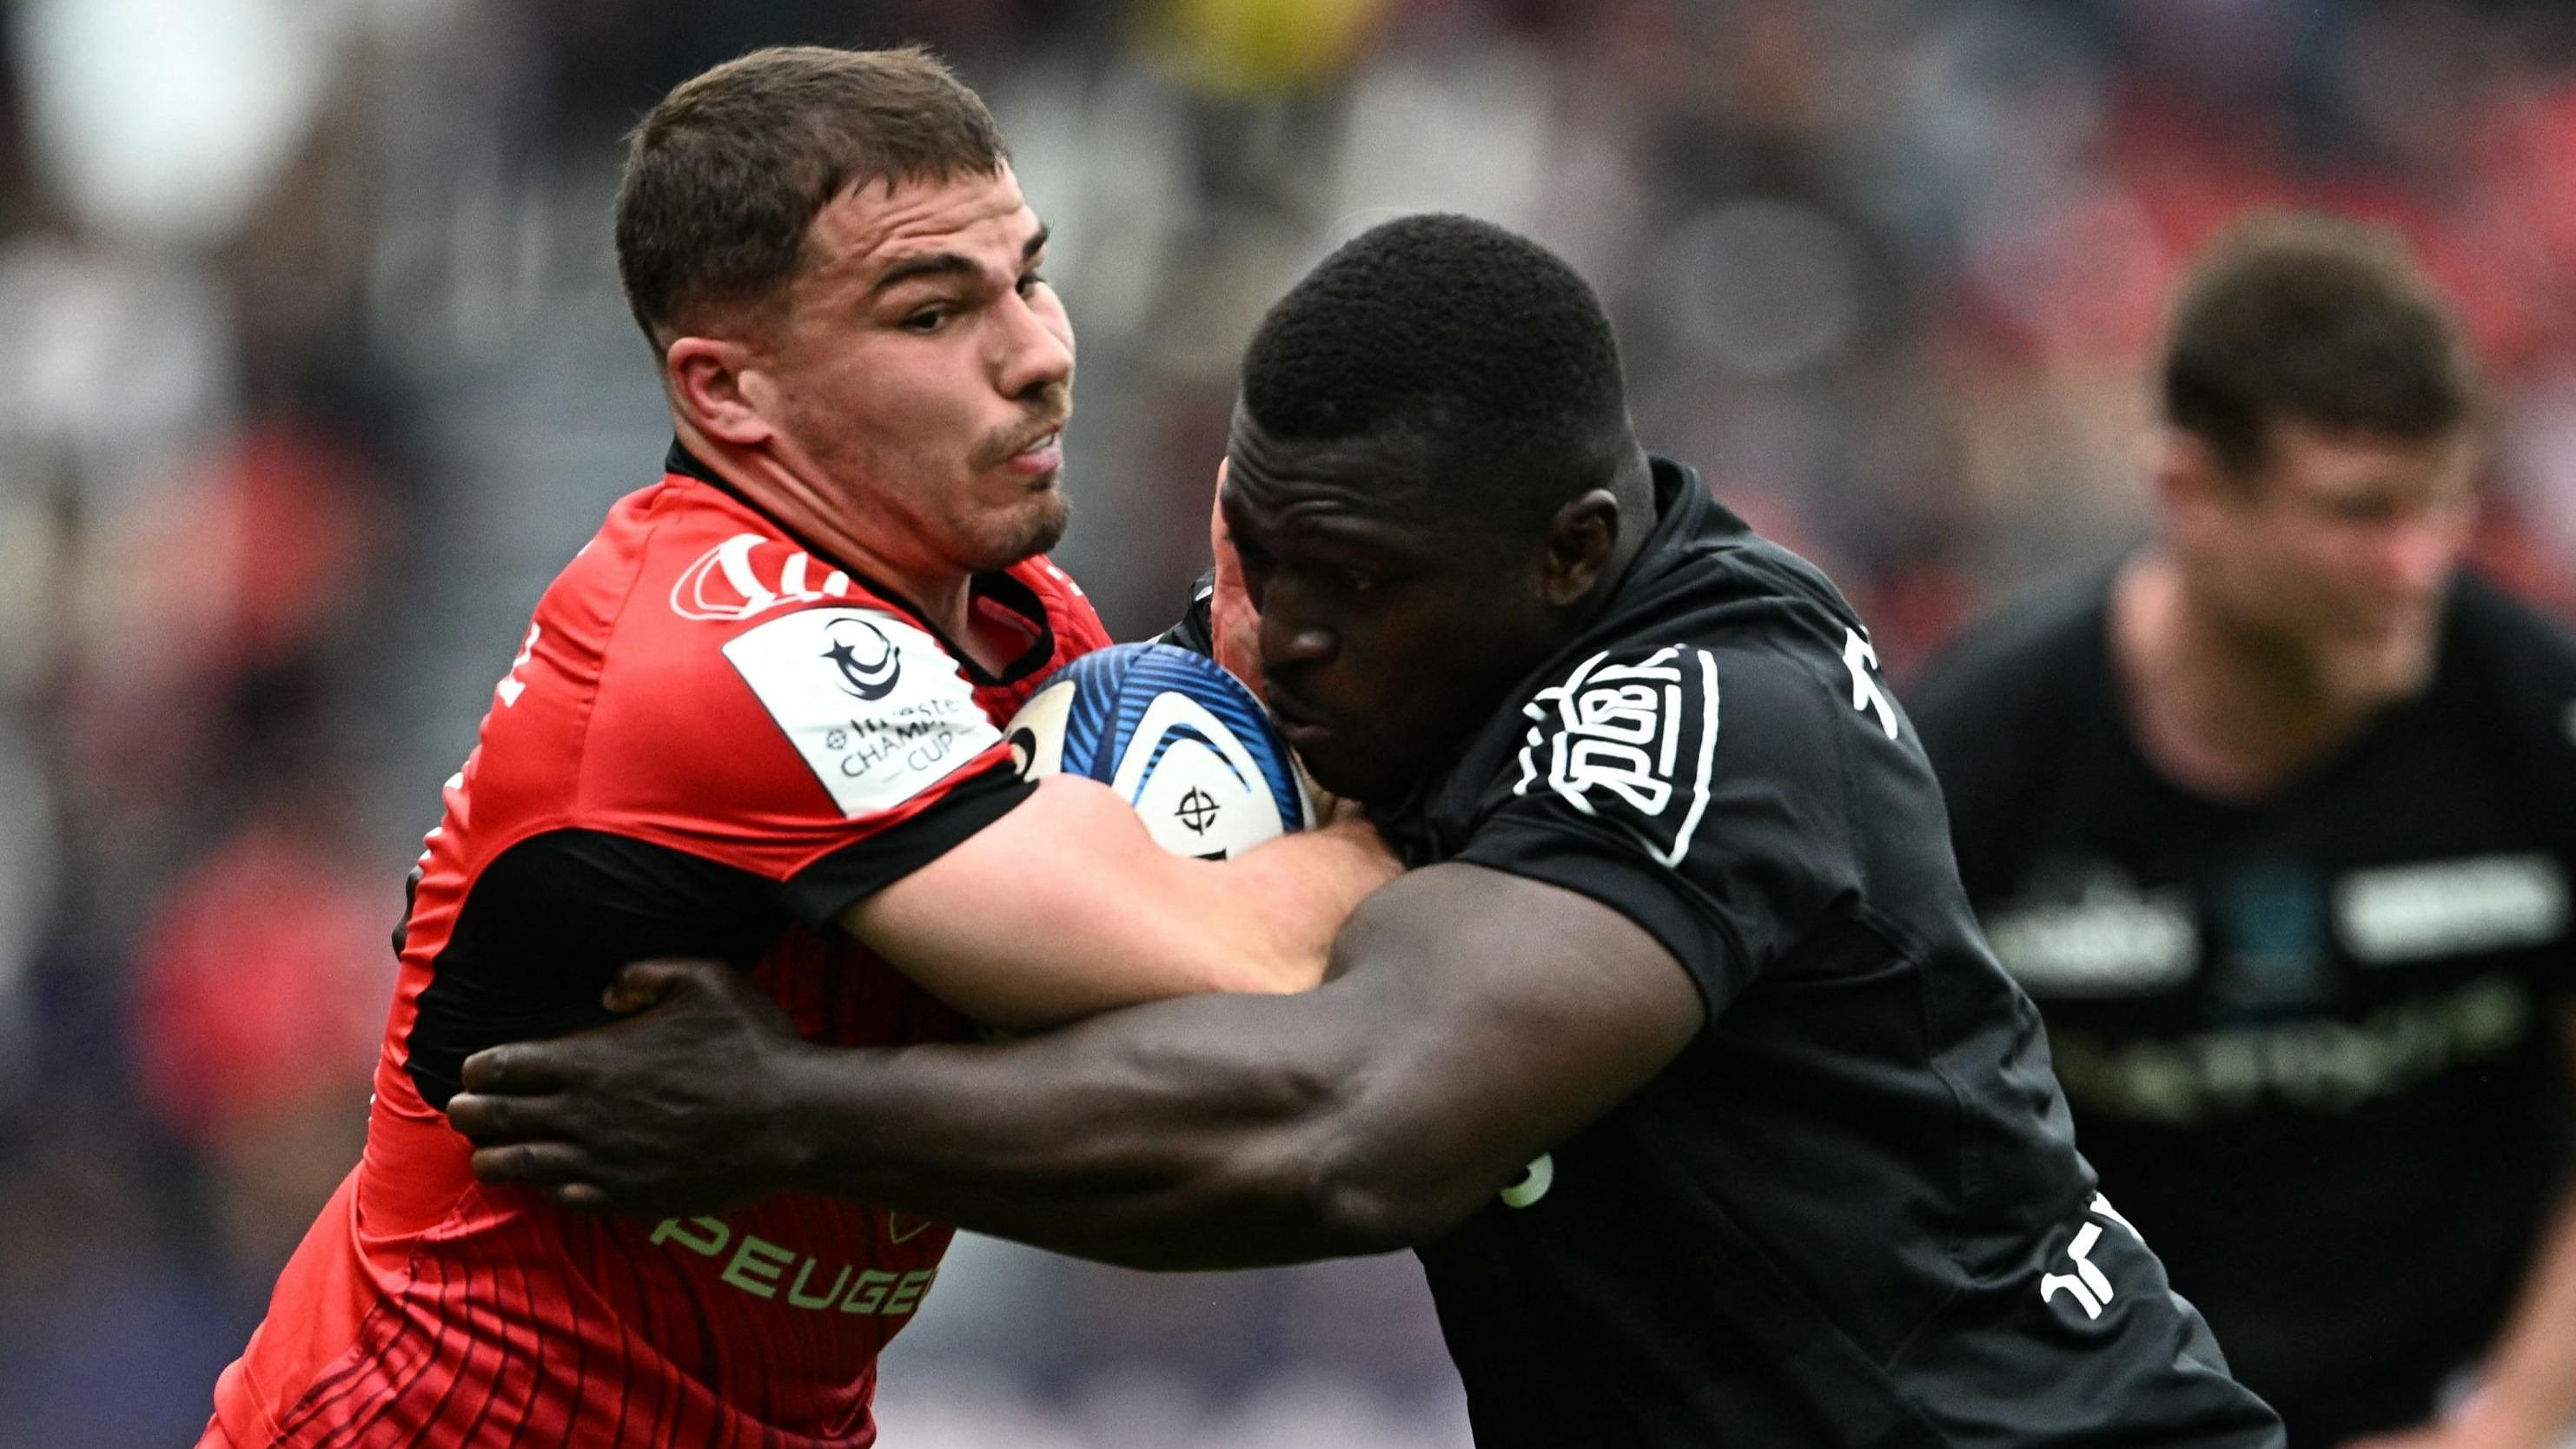 Rugby: Champions Cup or Top 14? “We both want to win as much as the other,” warns Antoine Dupont